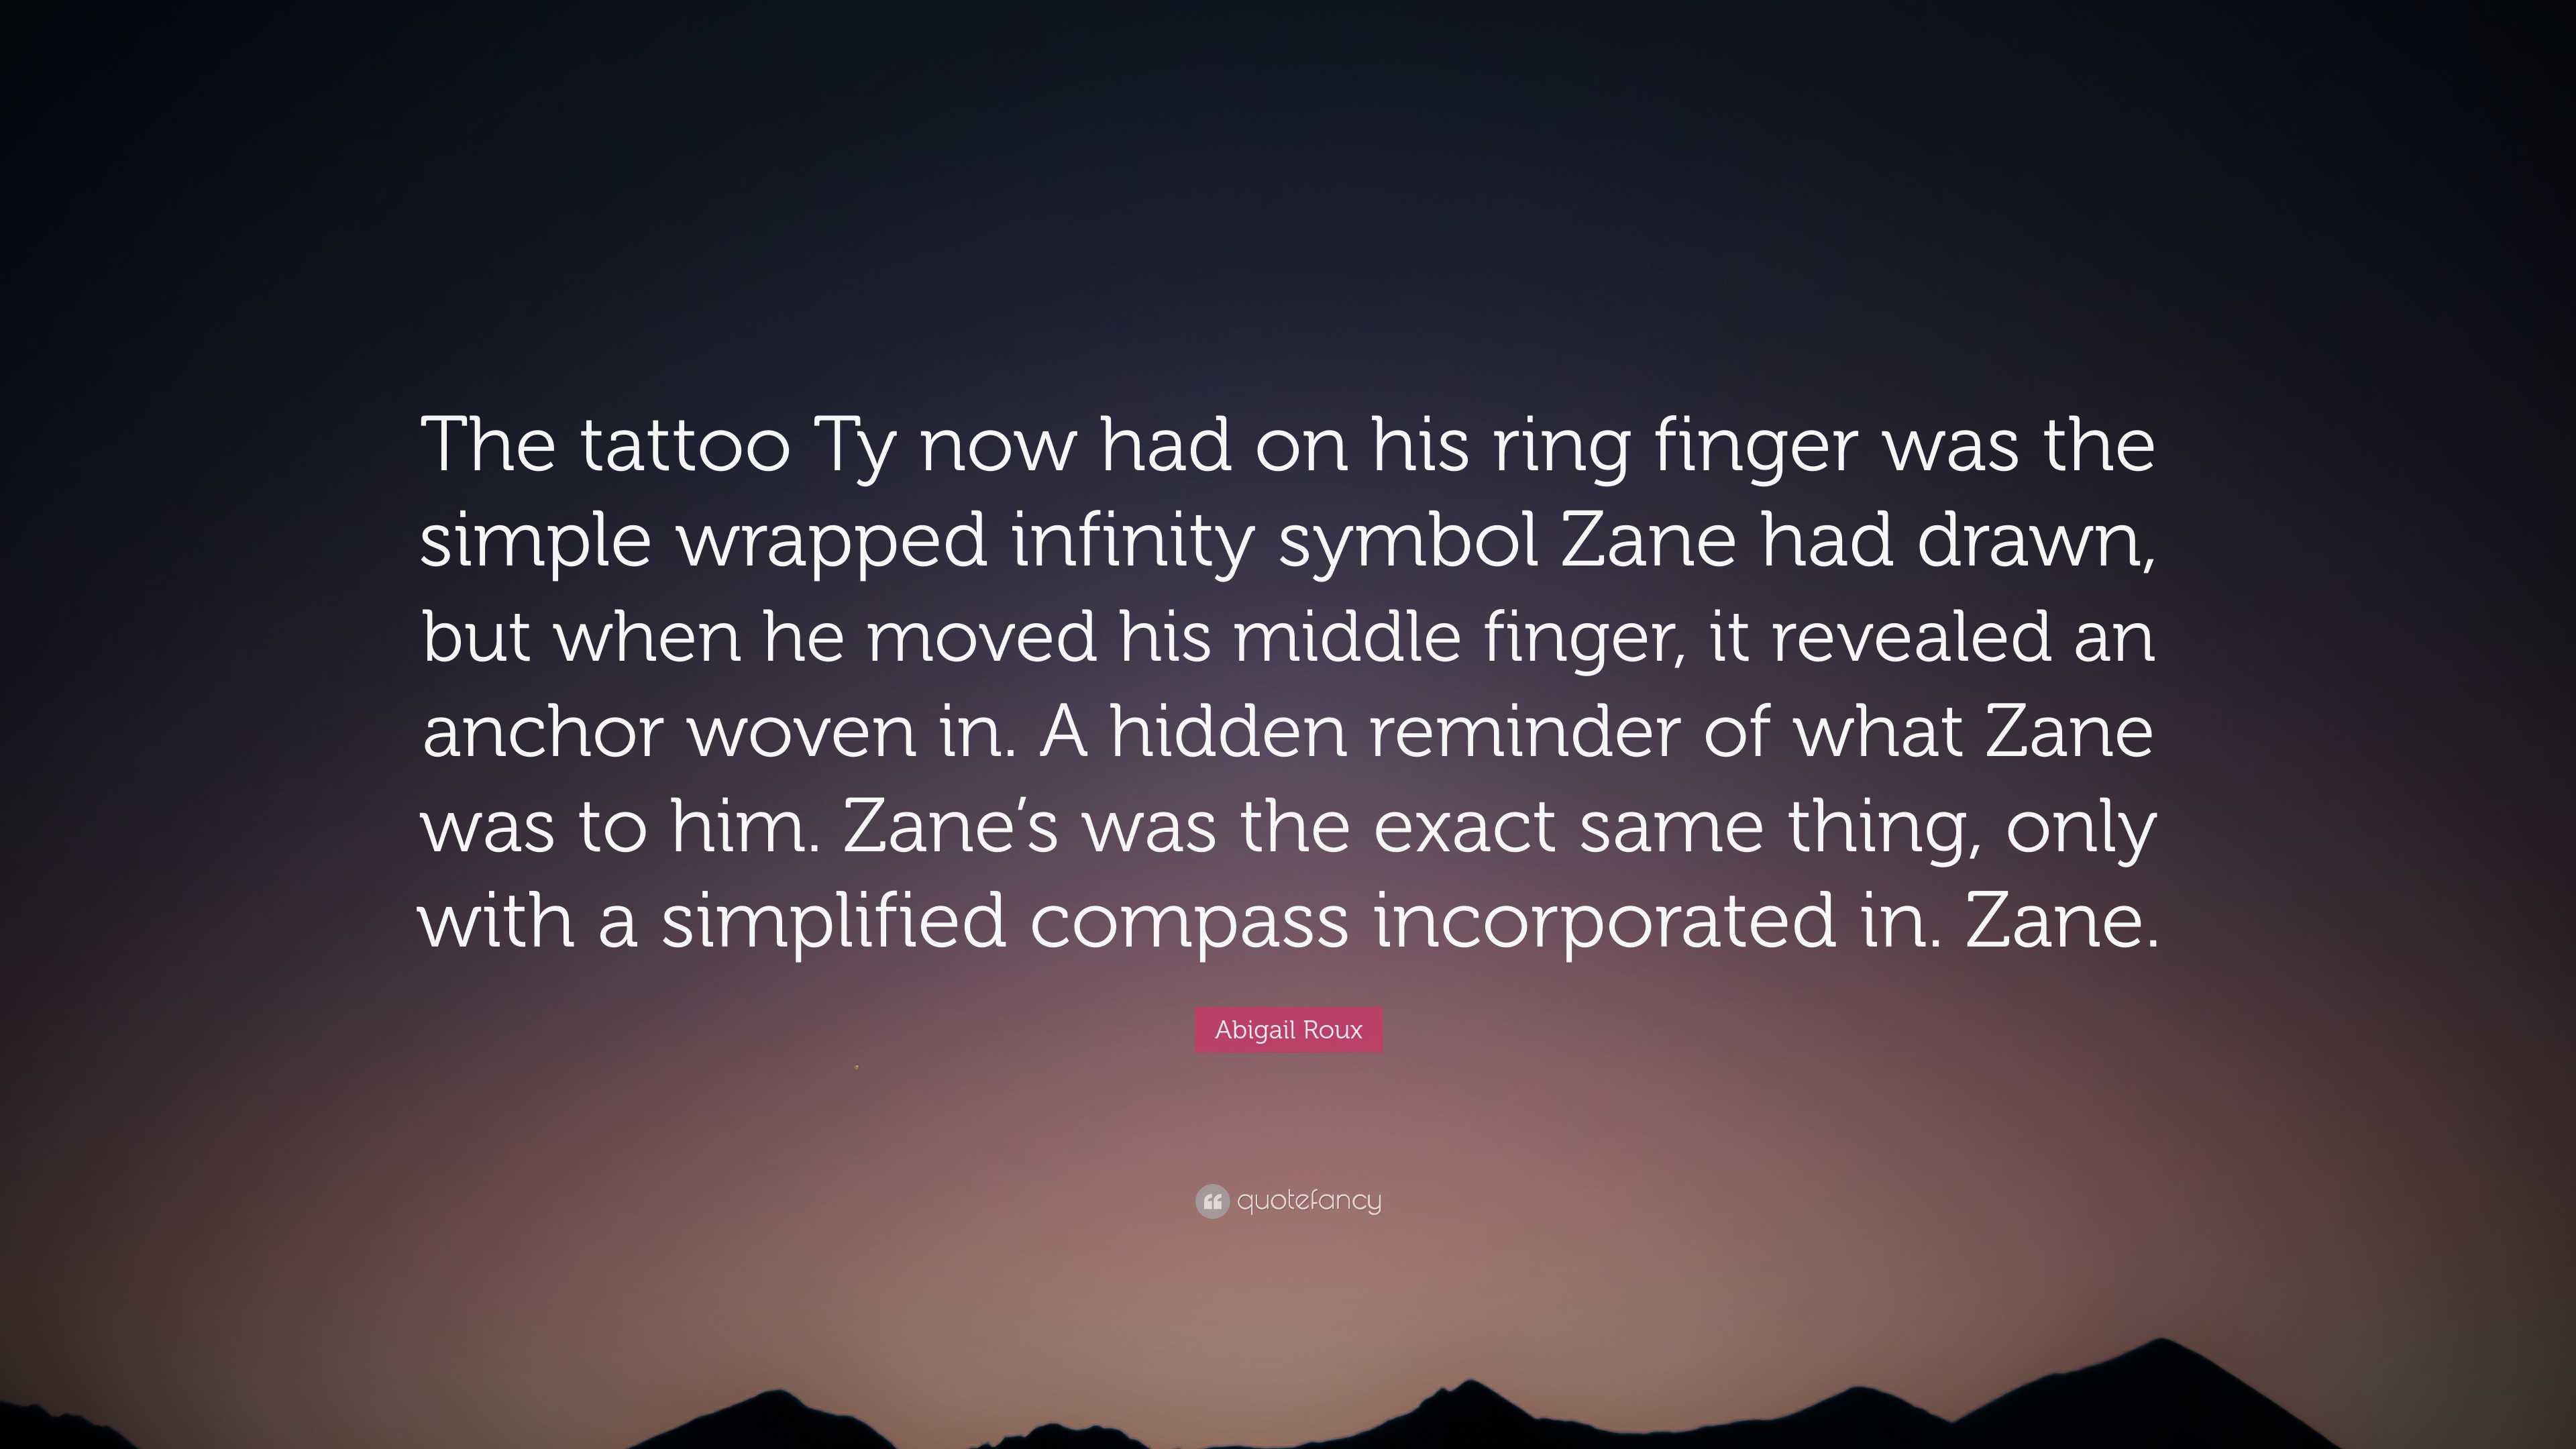 7853082 Abigail Roux Quote The tattoo Ty now had on his ring finger was